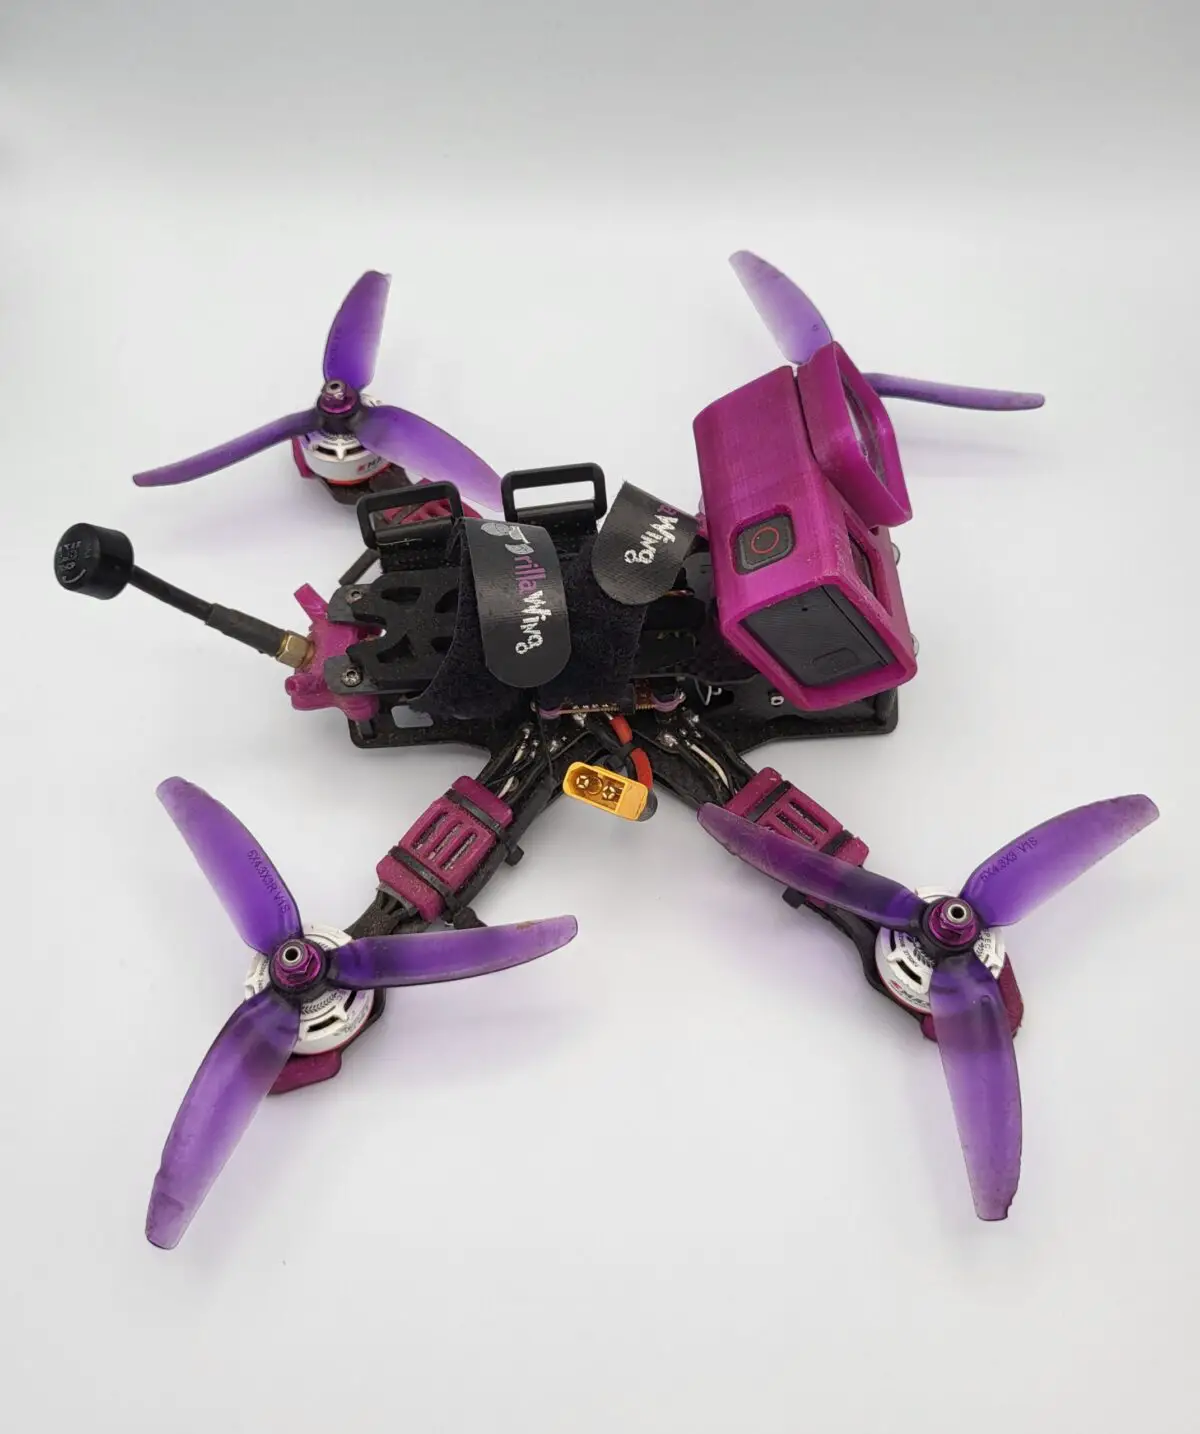 How Much Does It Cost To Build An FPV Drone? (What You Need To Know)